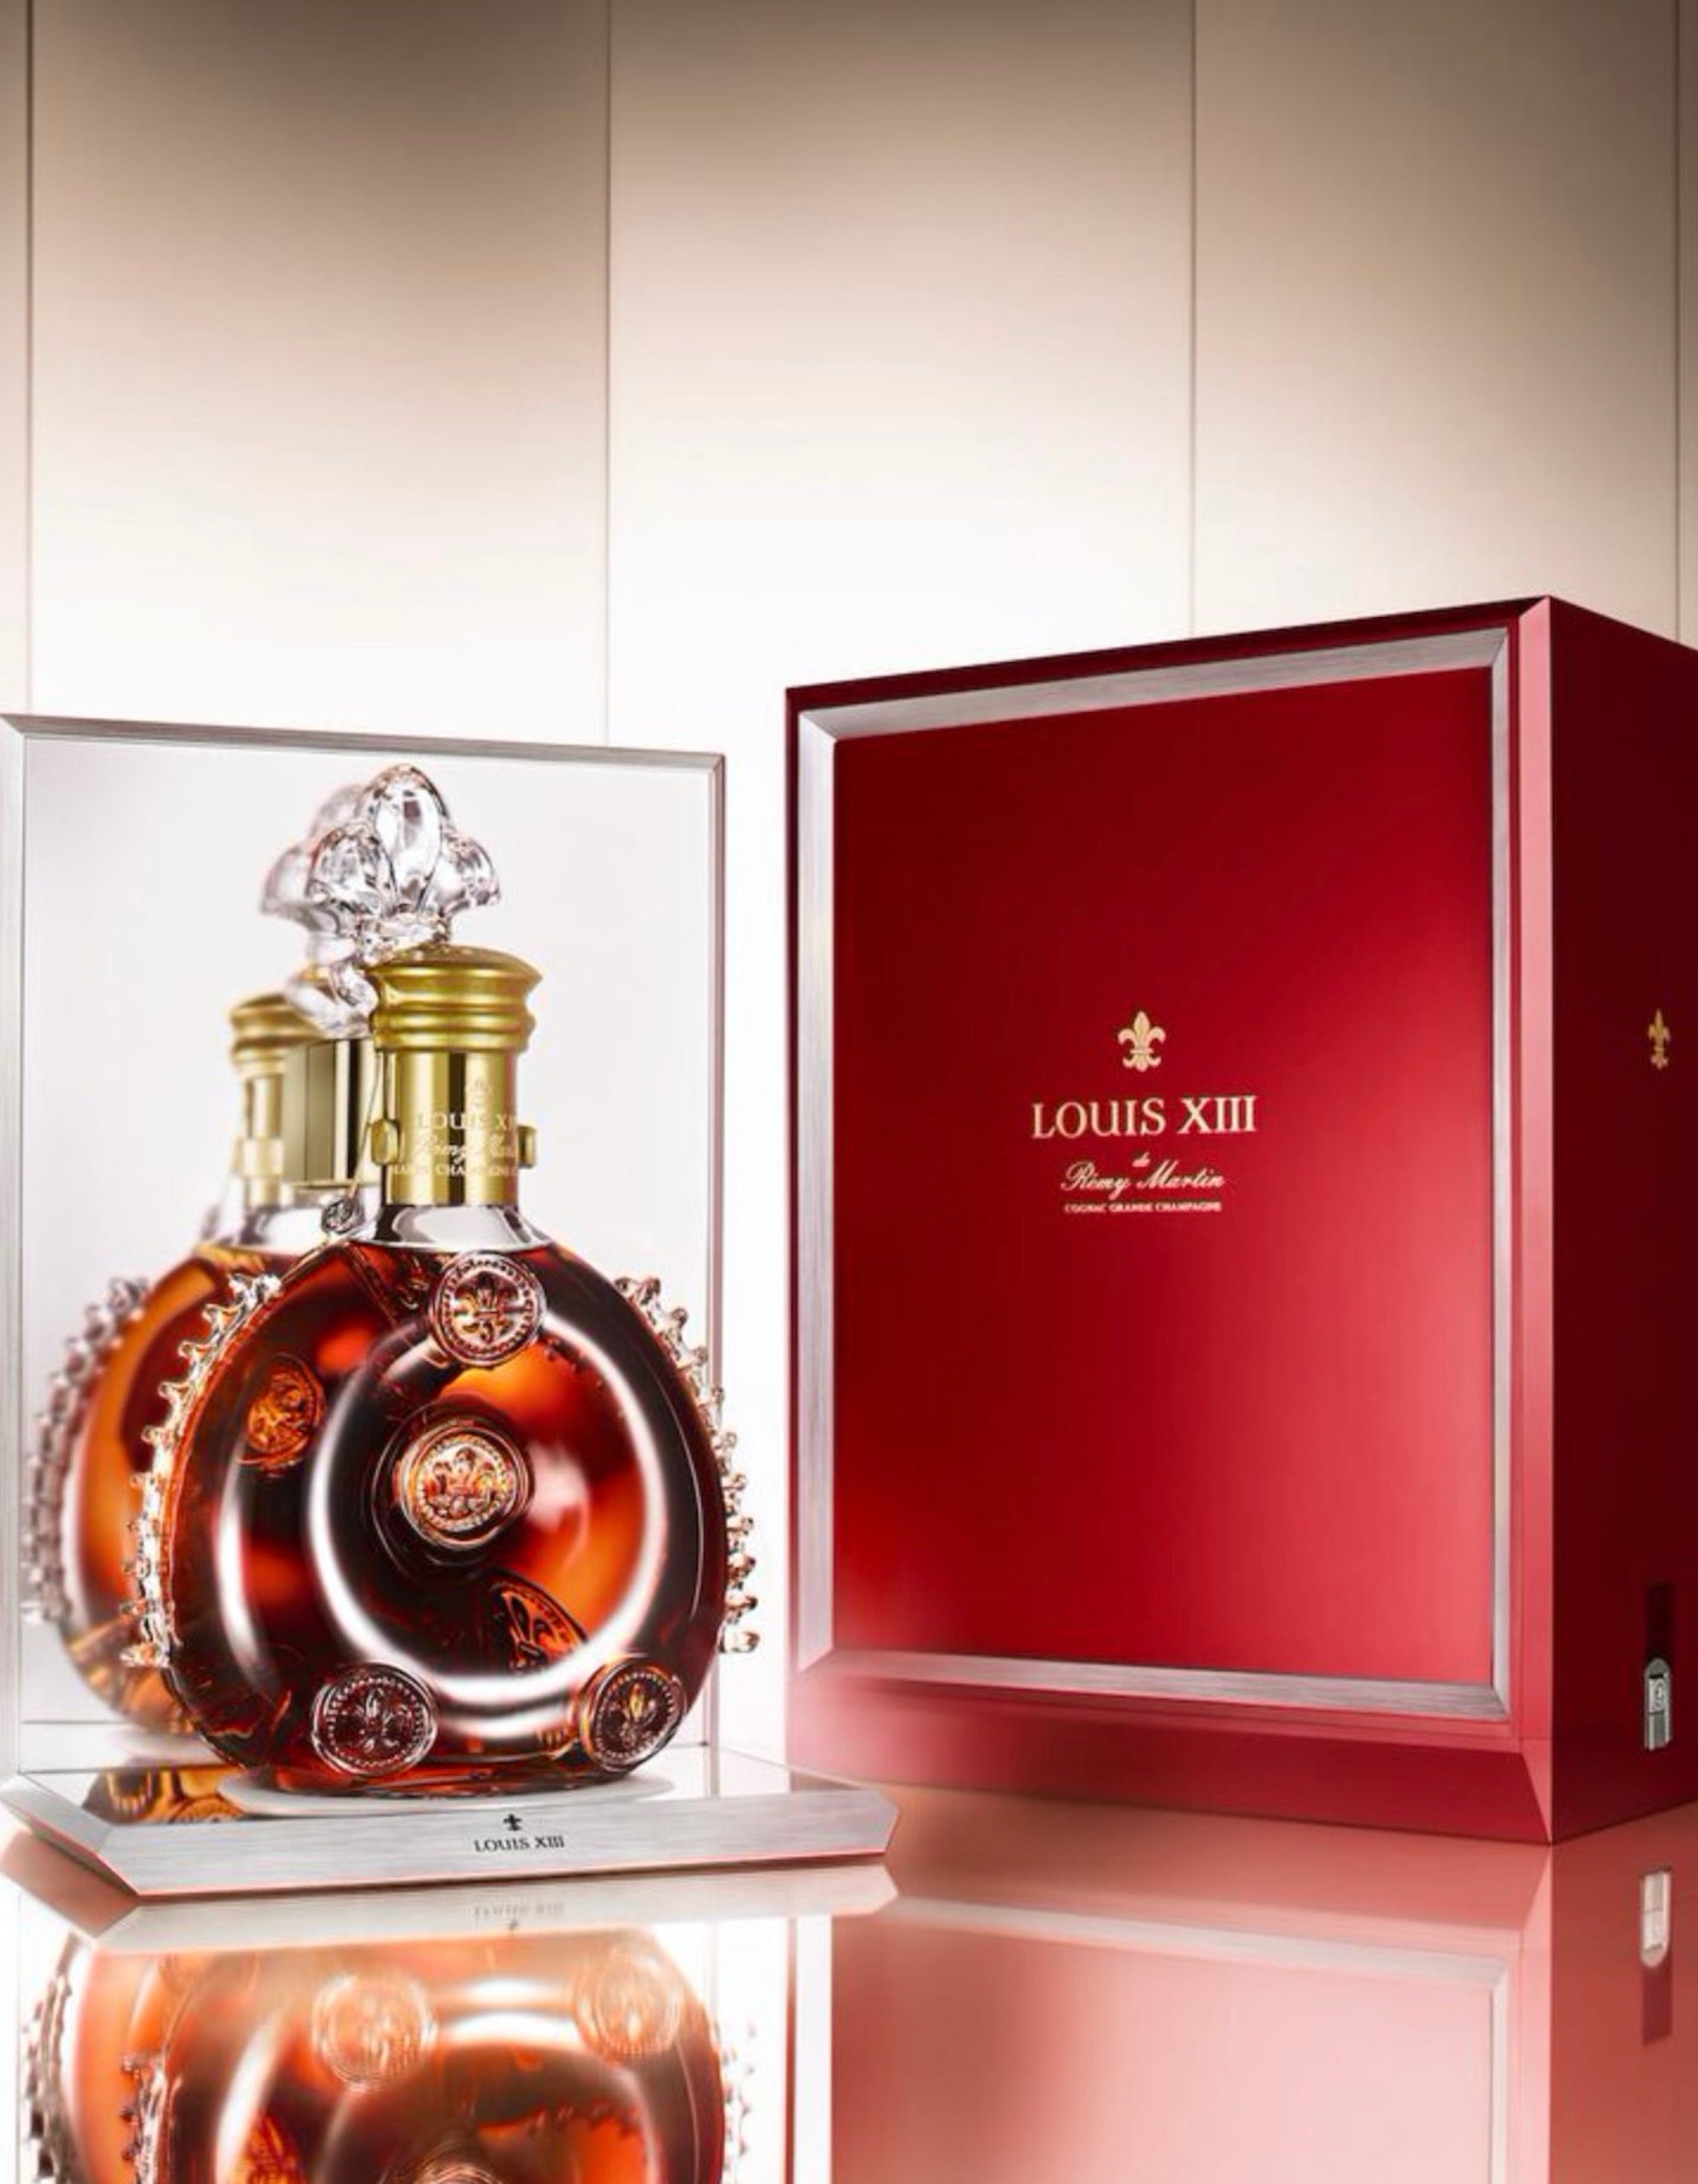 Remy Martin Louis XIII Magnum 1.75L | Delivery & Gifting